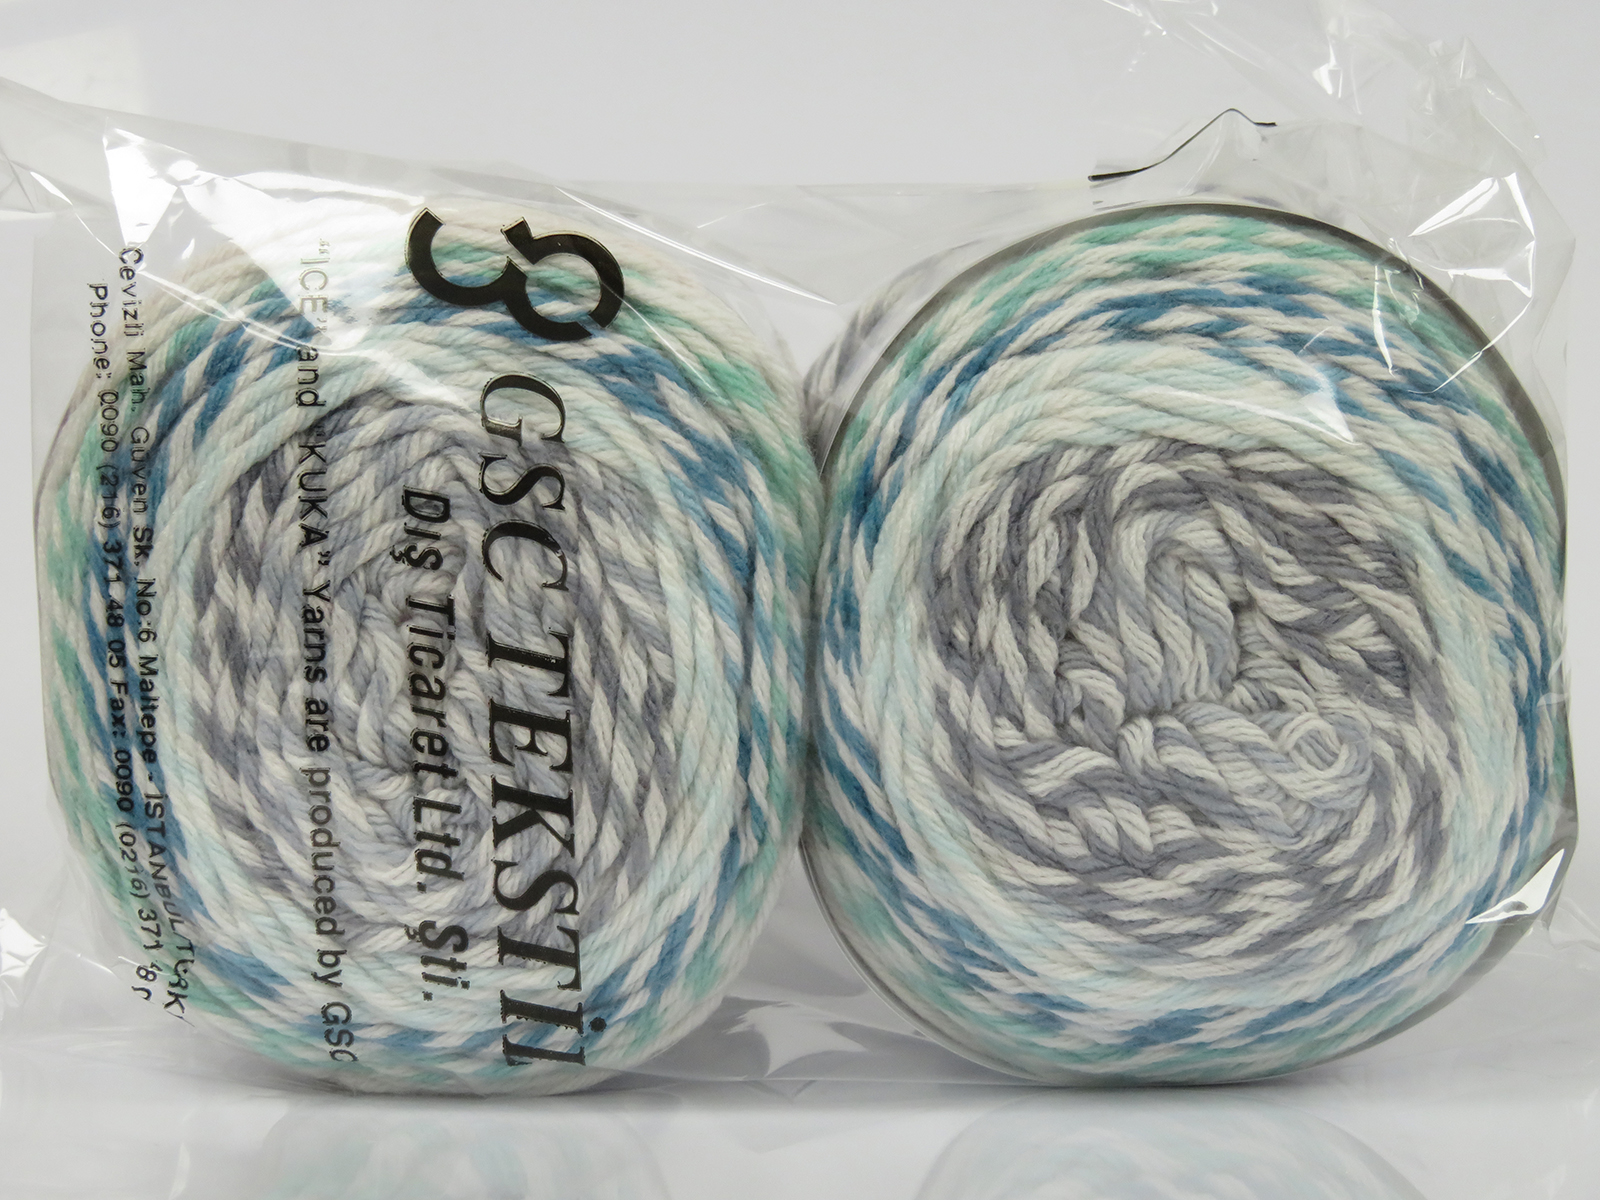 Cakes Jazz at Ice Yarns Online Yarn Store